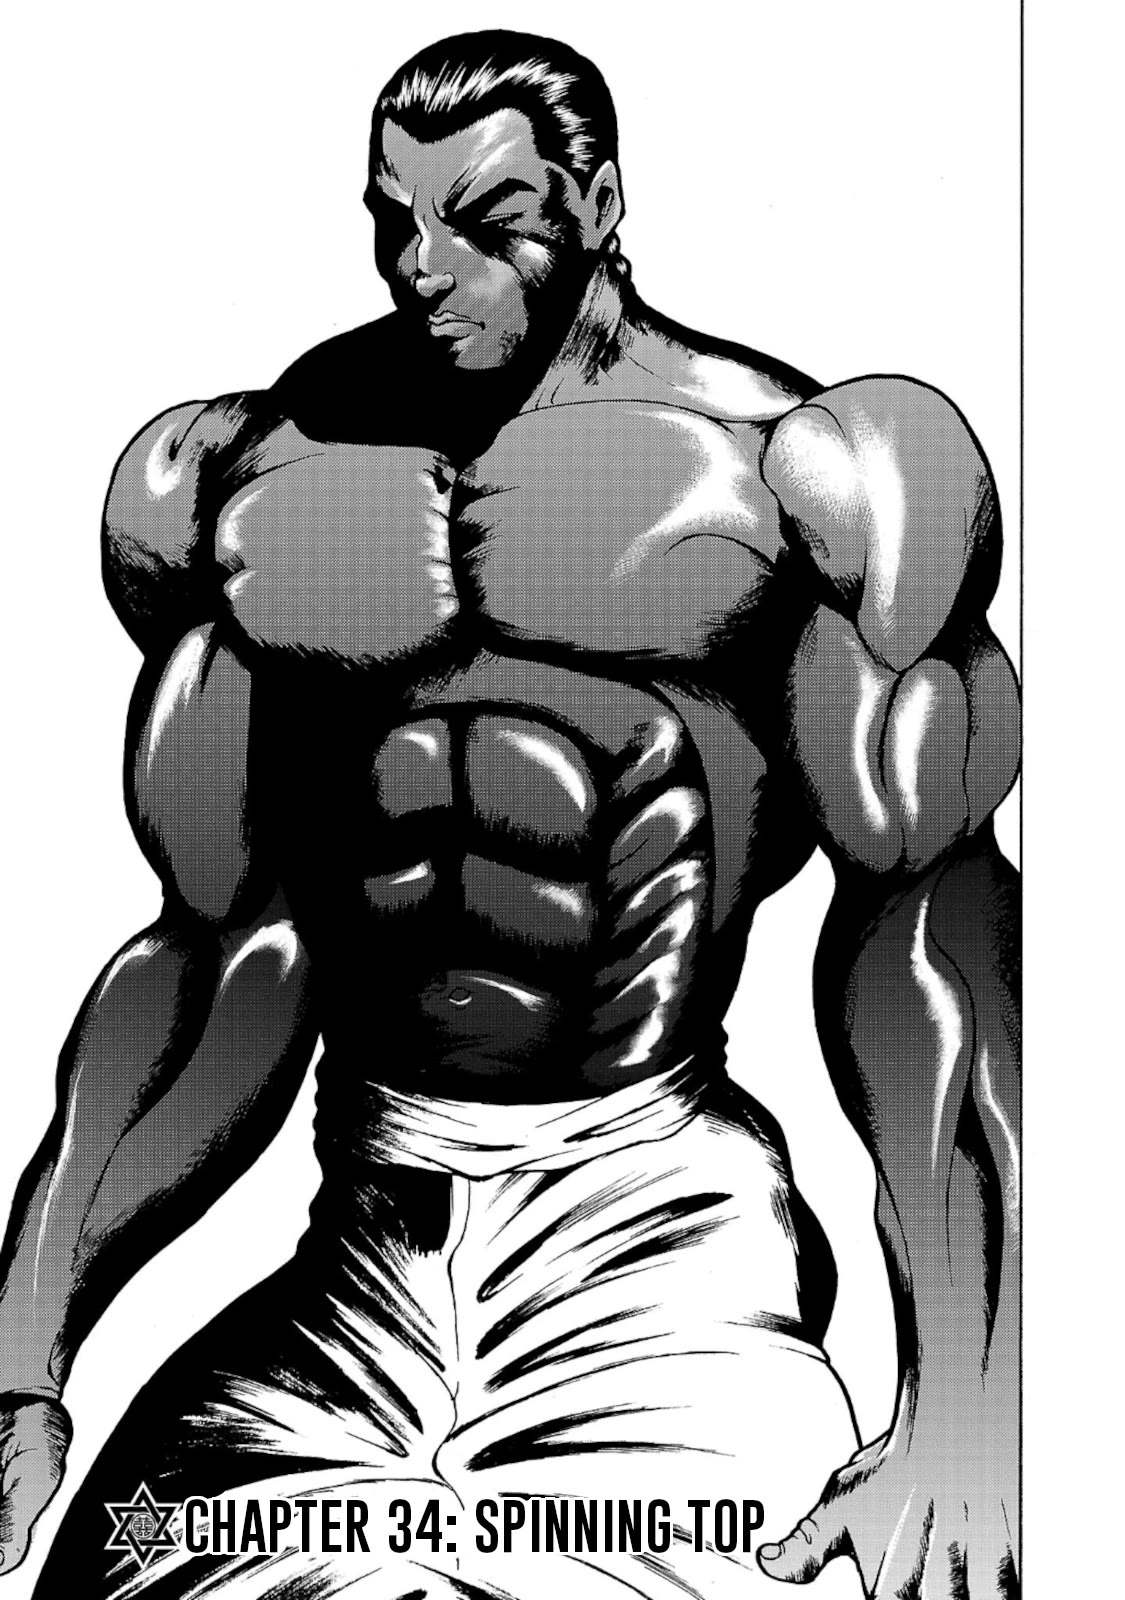 Baki Side Story - Retsu Kaioh Doesn't Mind Even If It's In Another World - chapter 34 - #1